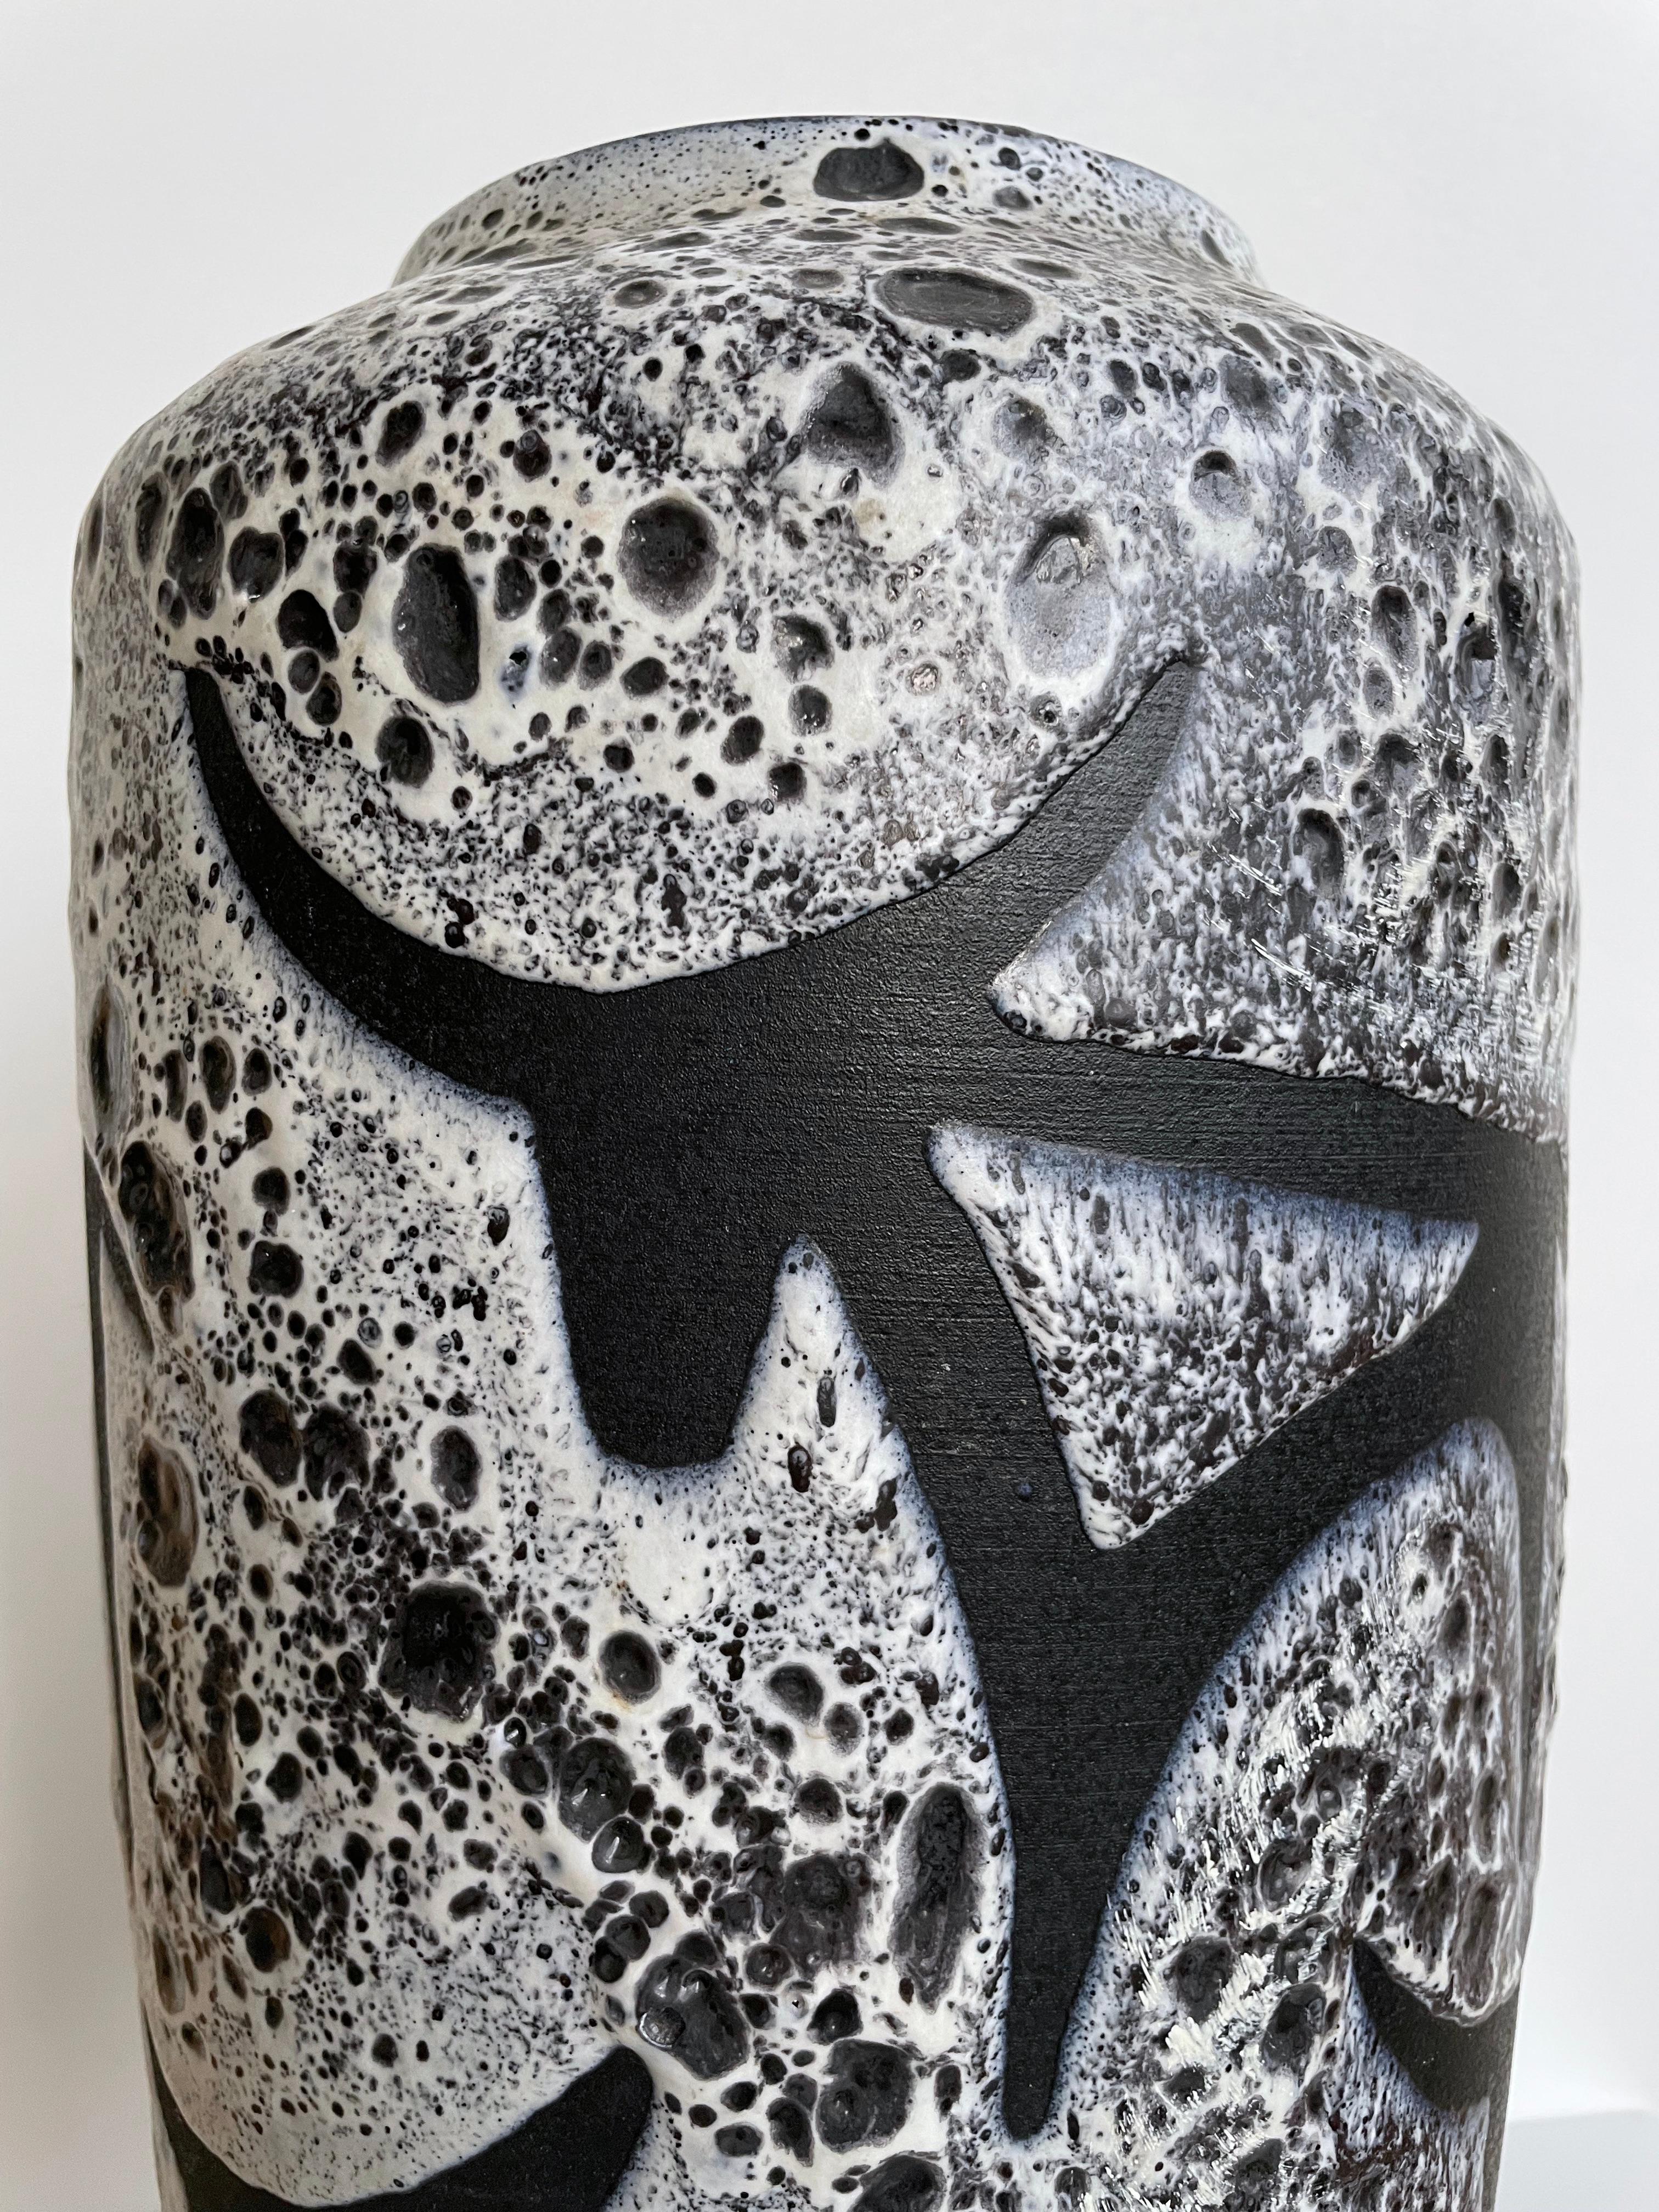 Large decorative vase produced by Scheurich Keramik (W.Germany) in the early to mid-1970s. Features a rare Texas Longhorn / primitive cave painting design with a black and white crackle glaze. Numbered on base: W.Germany 517-45 (45cm in height).